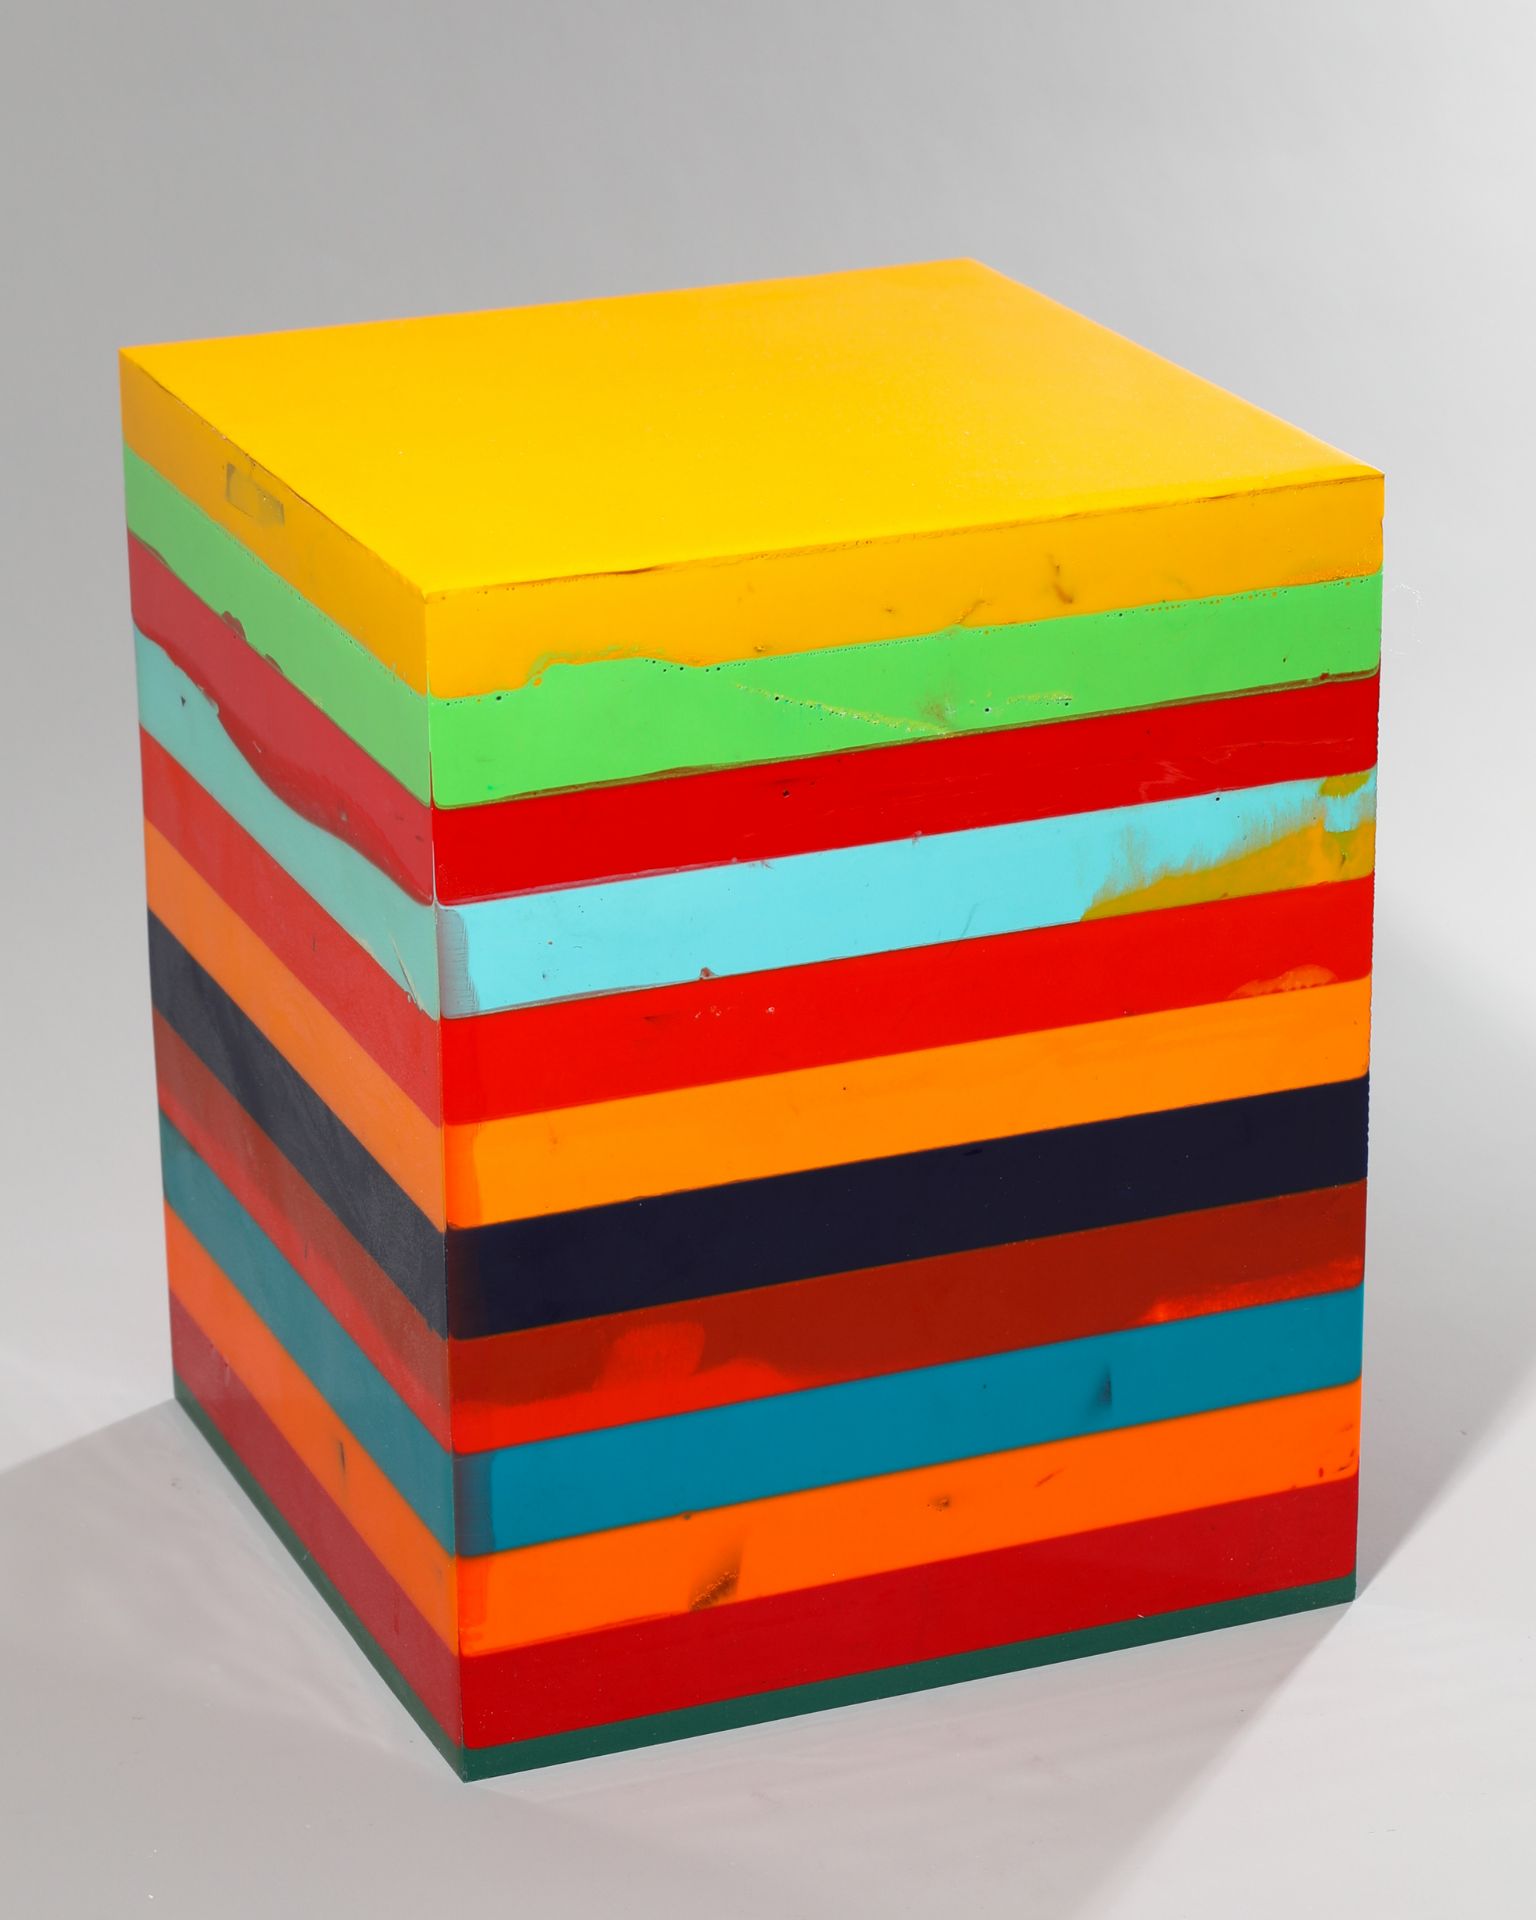 Markus Linnenbrink*, Mexicogelb, 2002, Solid Cube, Colored epoxy resin - Image 4 of 5